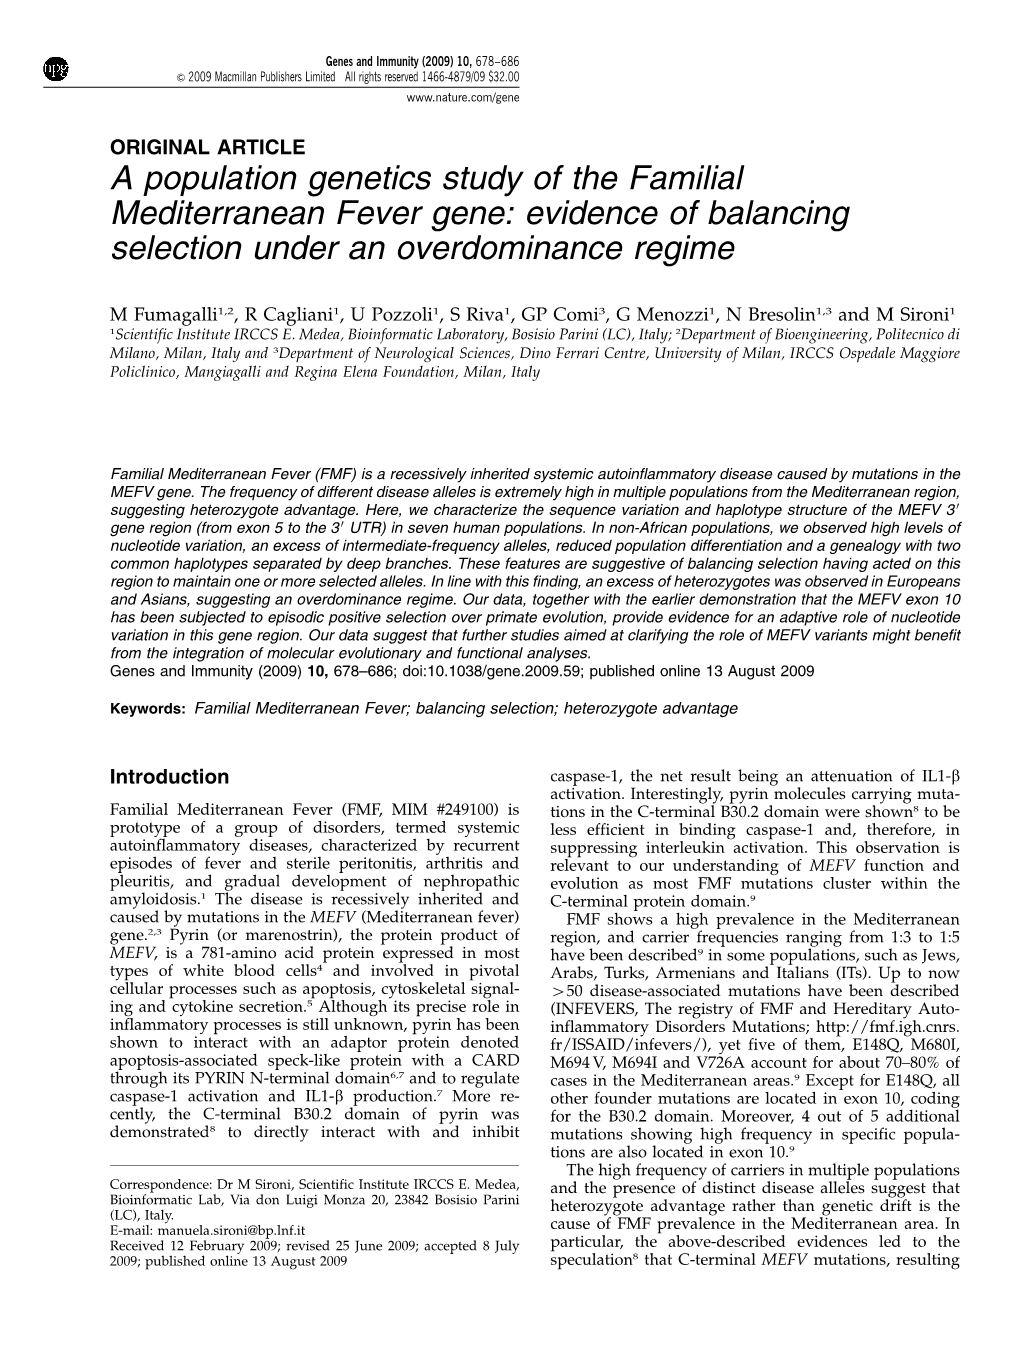 A Population Genetics Study of the Familial Mediterranean Fever Gene: Evidence of Balancing Selection Under an Overdominance Regime